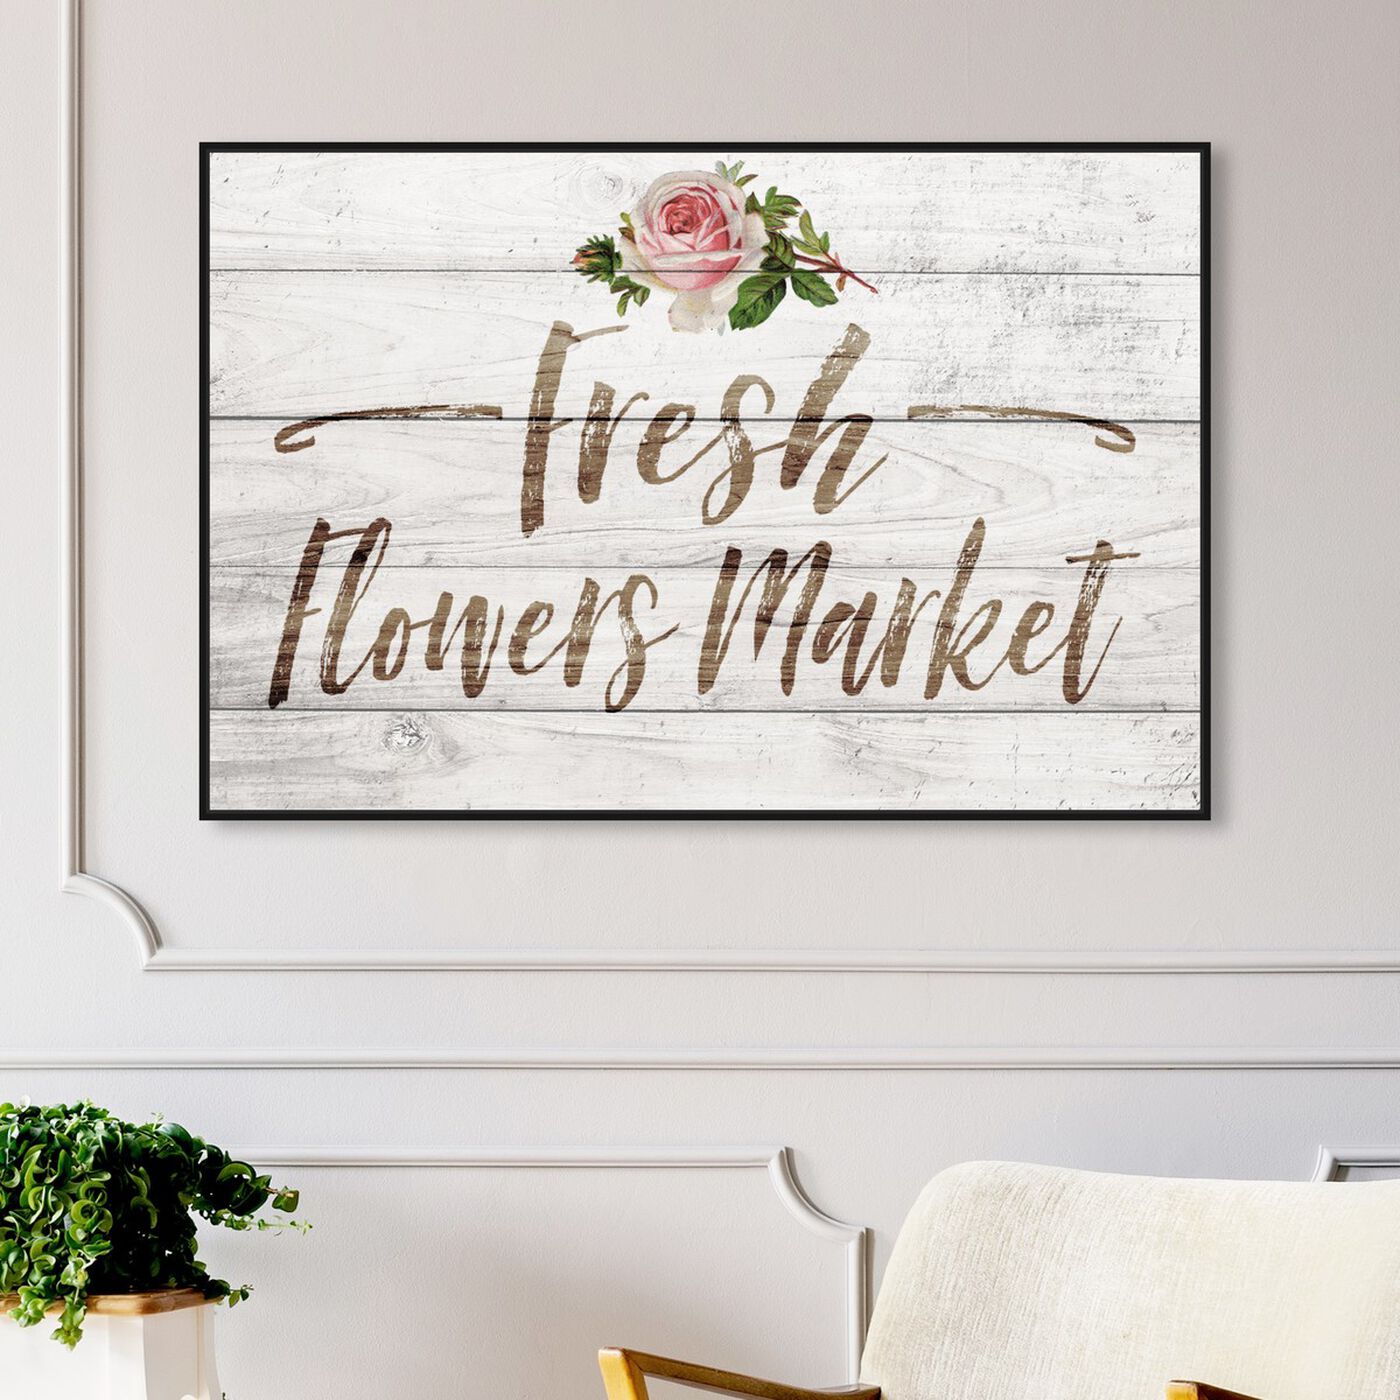 Hanging view of Fresh Flowers Market featuring typography and quotes and quotes and sayings art.